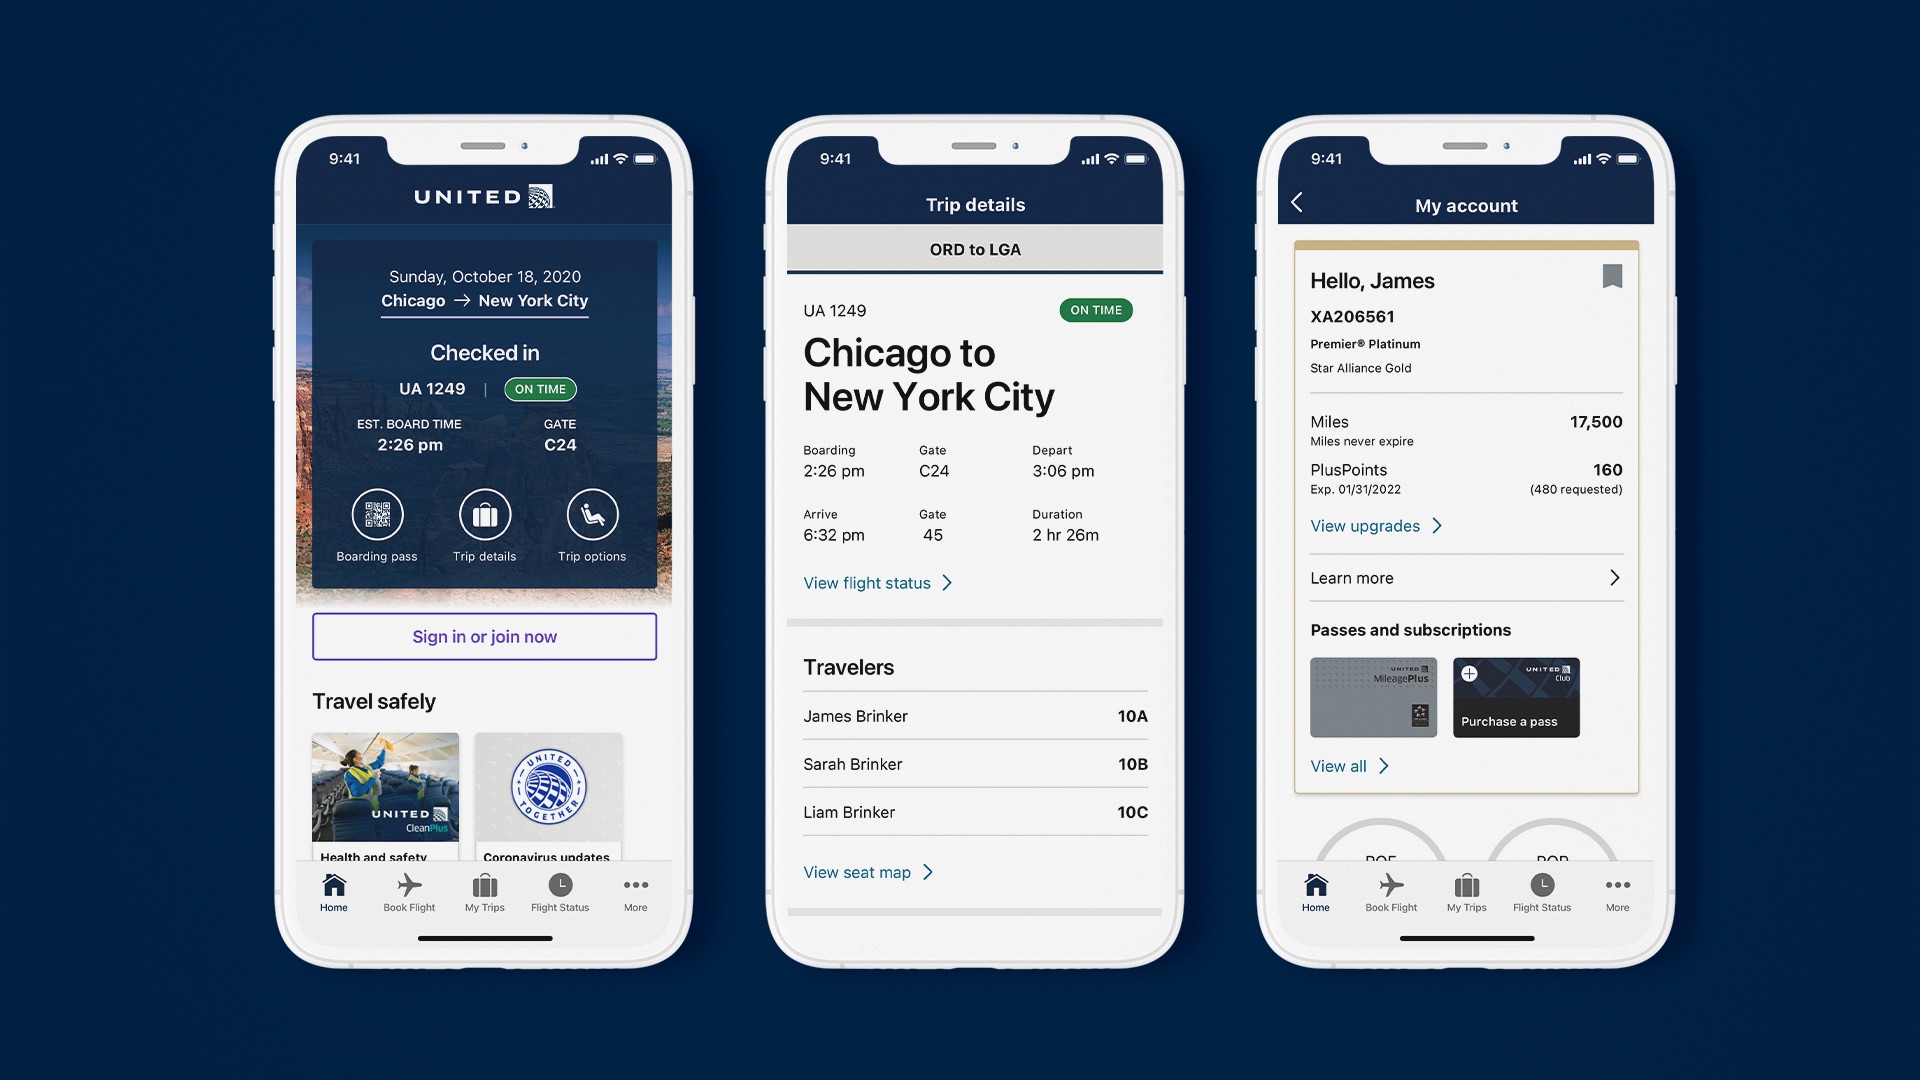 Test Driving The Latest Version Of The United App - Live and Let's Fly